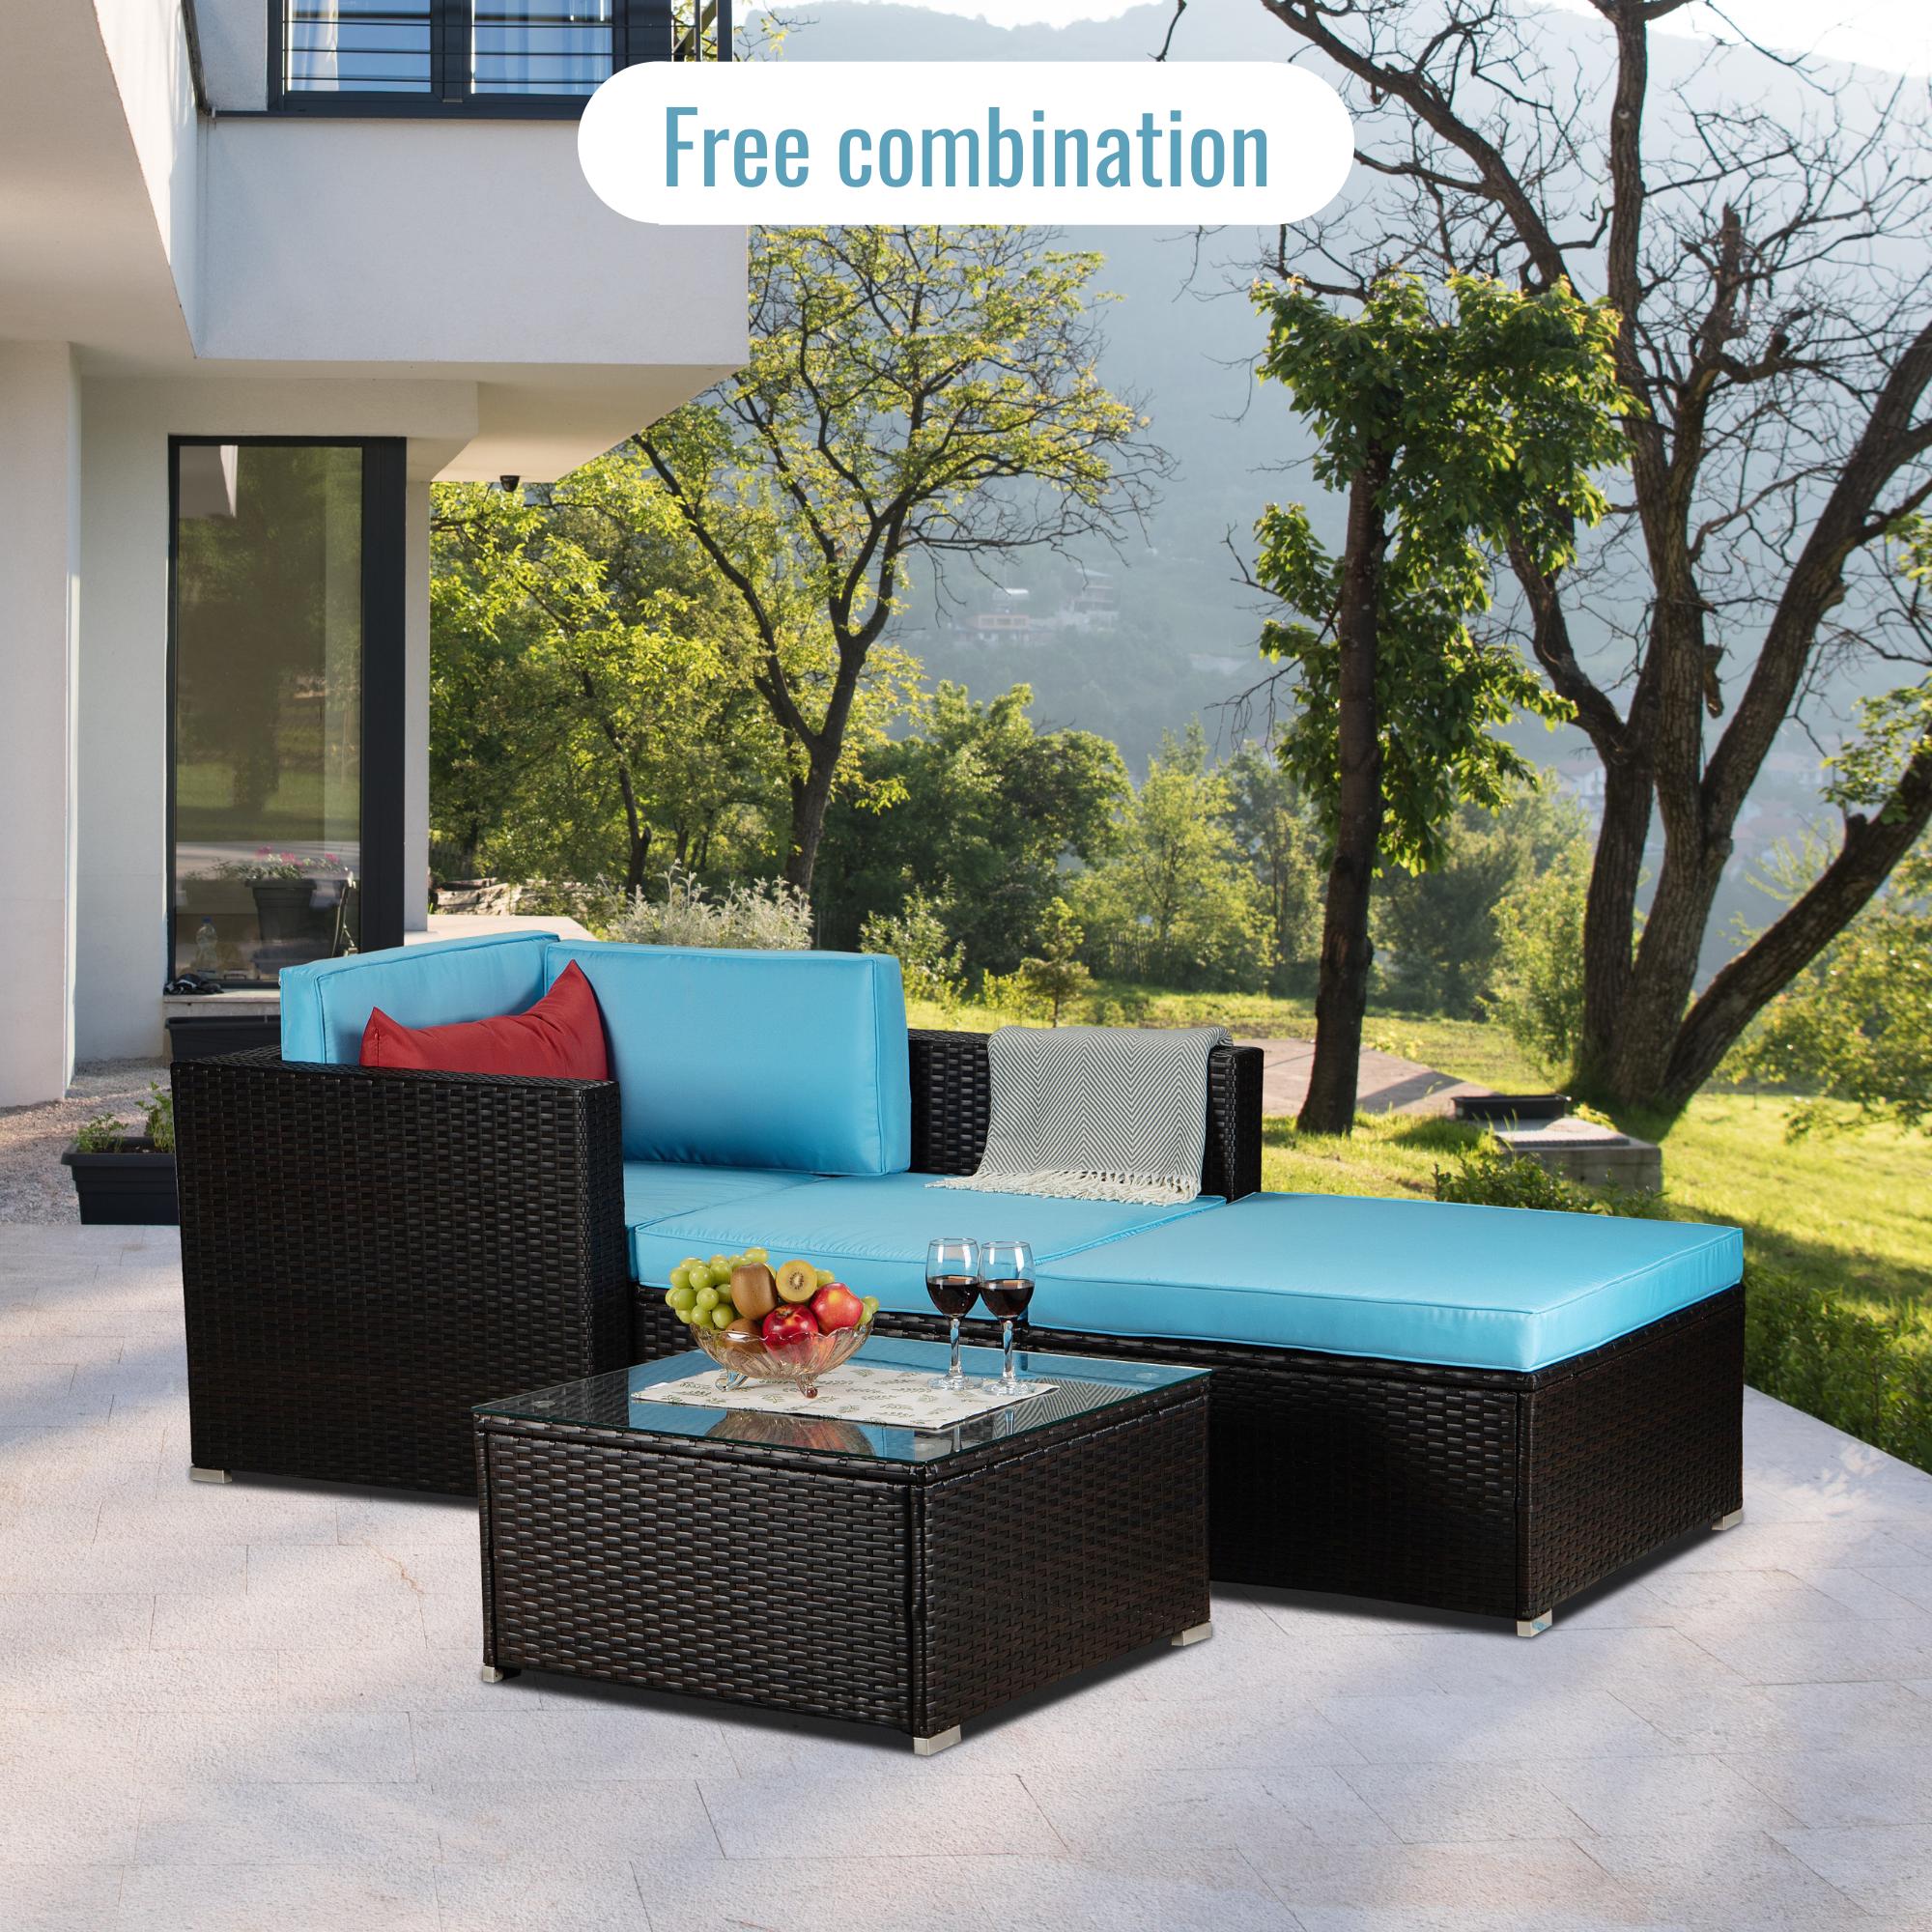 4 Piece Outdoor Patio Furniture Set, All-weather PE Rattan Wicker Sectional Sofa Set with Navvy Cushions and Red Pillow, Outdoor Conversation Couch Set for Backyard Garden Poolside Porch, Brown - image 4 of 21